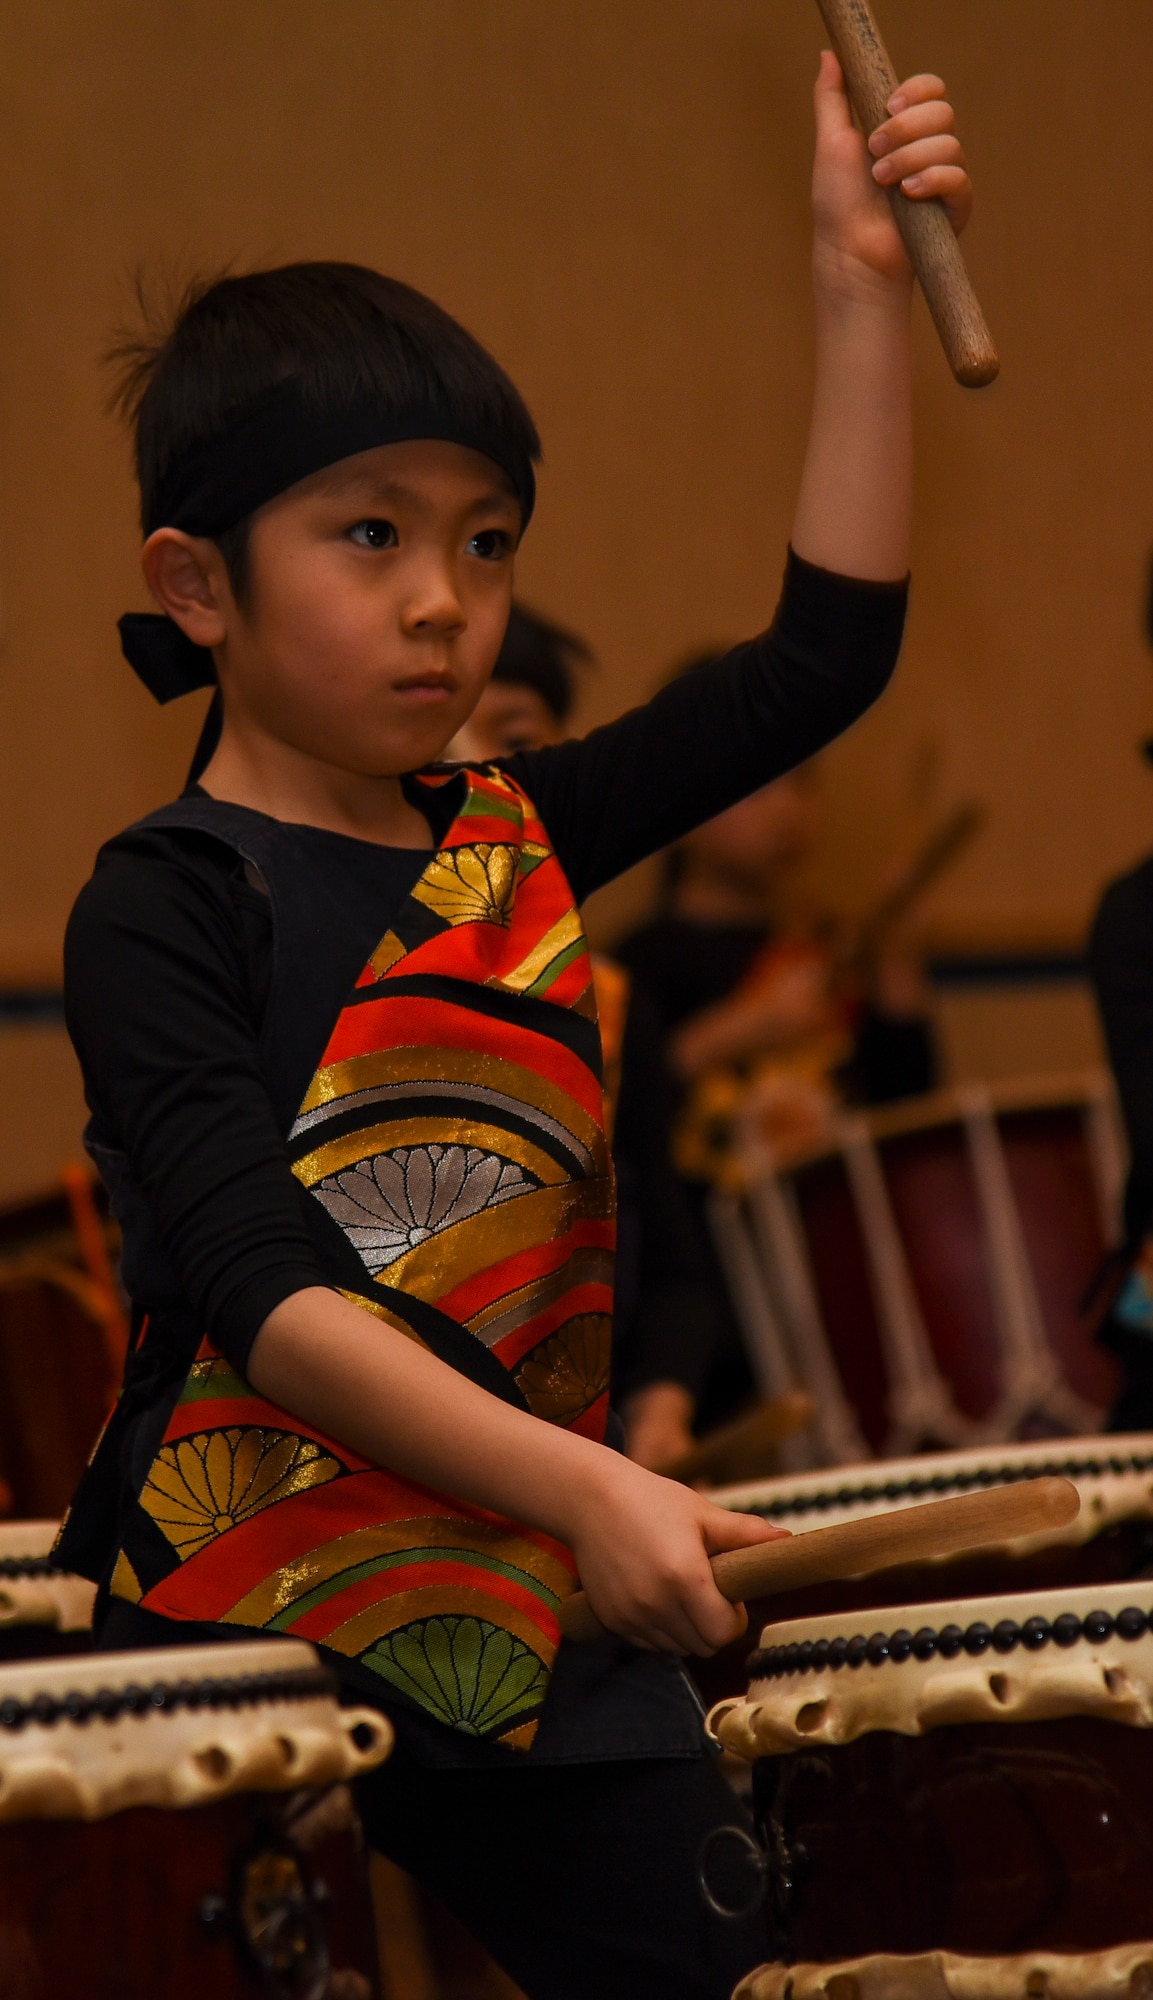 A Makibano Kids drummer plays a taiko drum during the 32nd Annual Japan Day festival at Misawa Air Base, Japan, April 6, 2019. This was one of 16 performance groups that traveled across the Aomori prefecture to attend the Japan Day event. (U.S. Air Force photo by Branden Yamada)